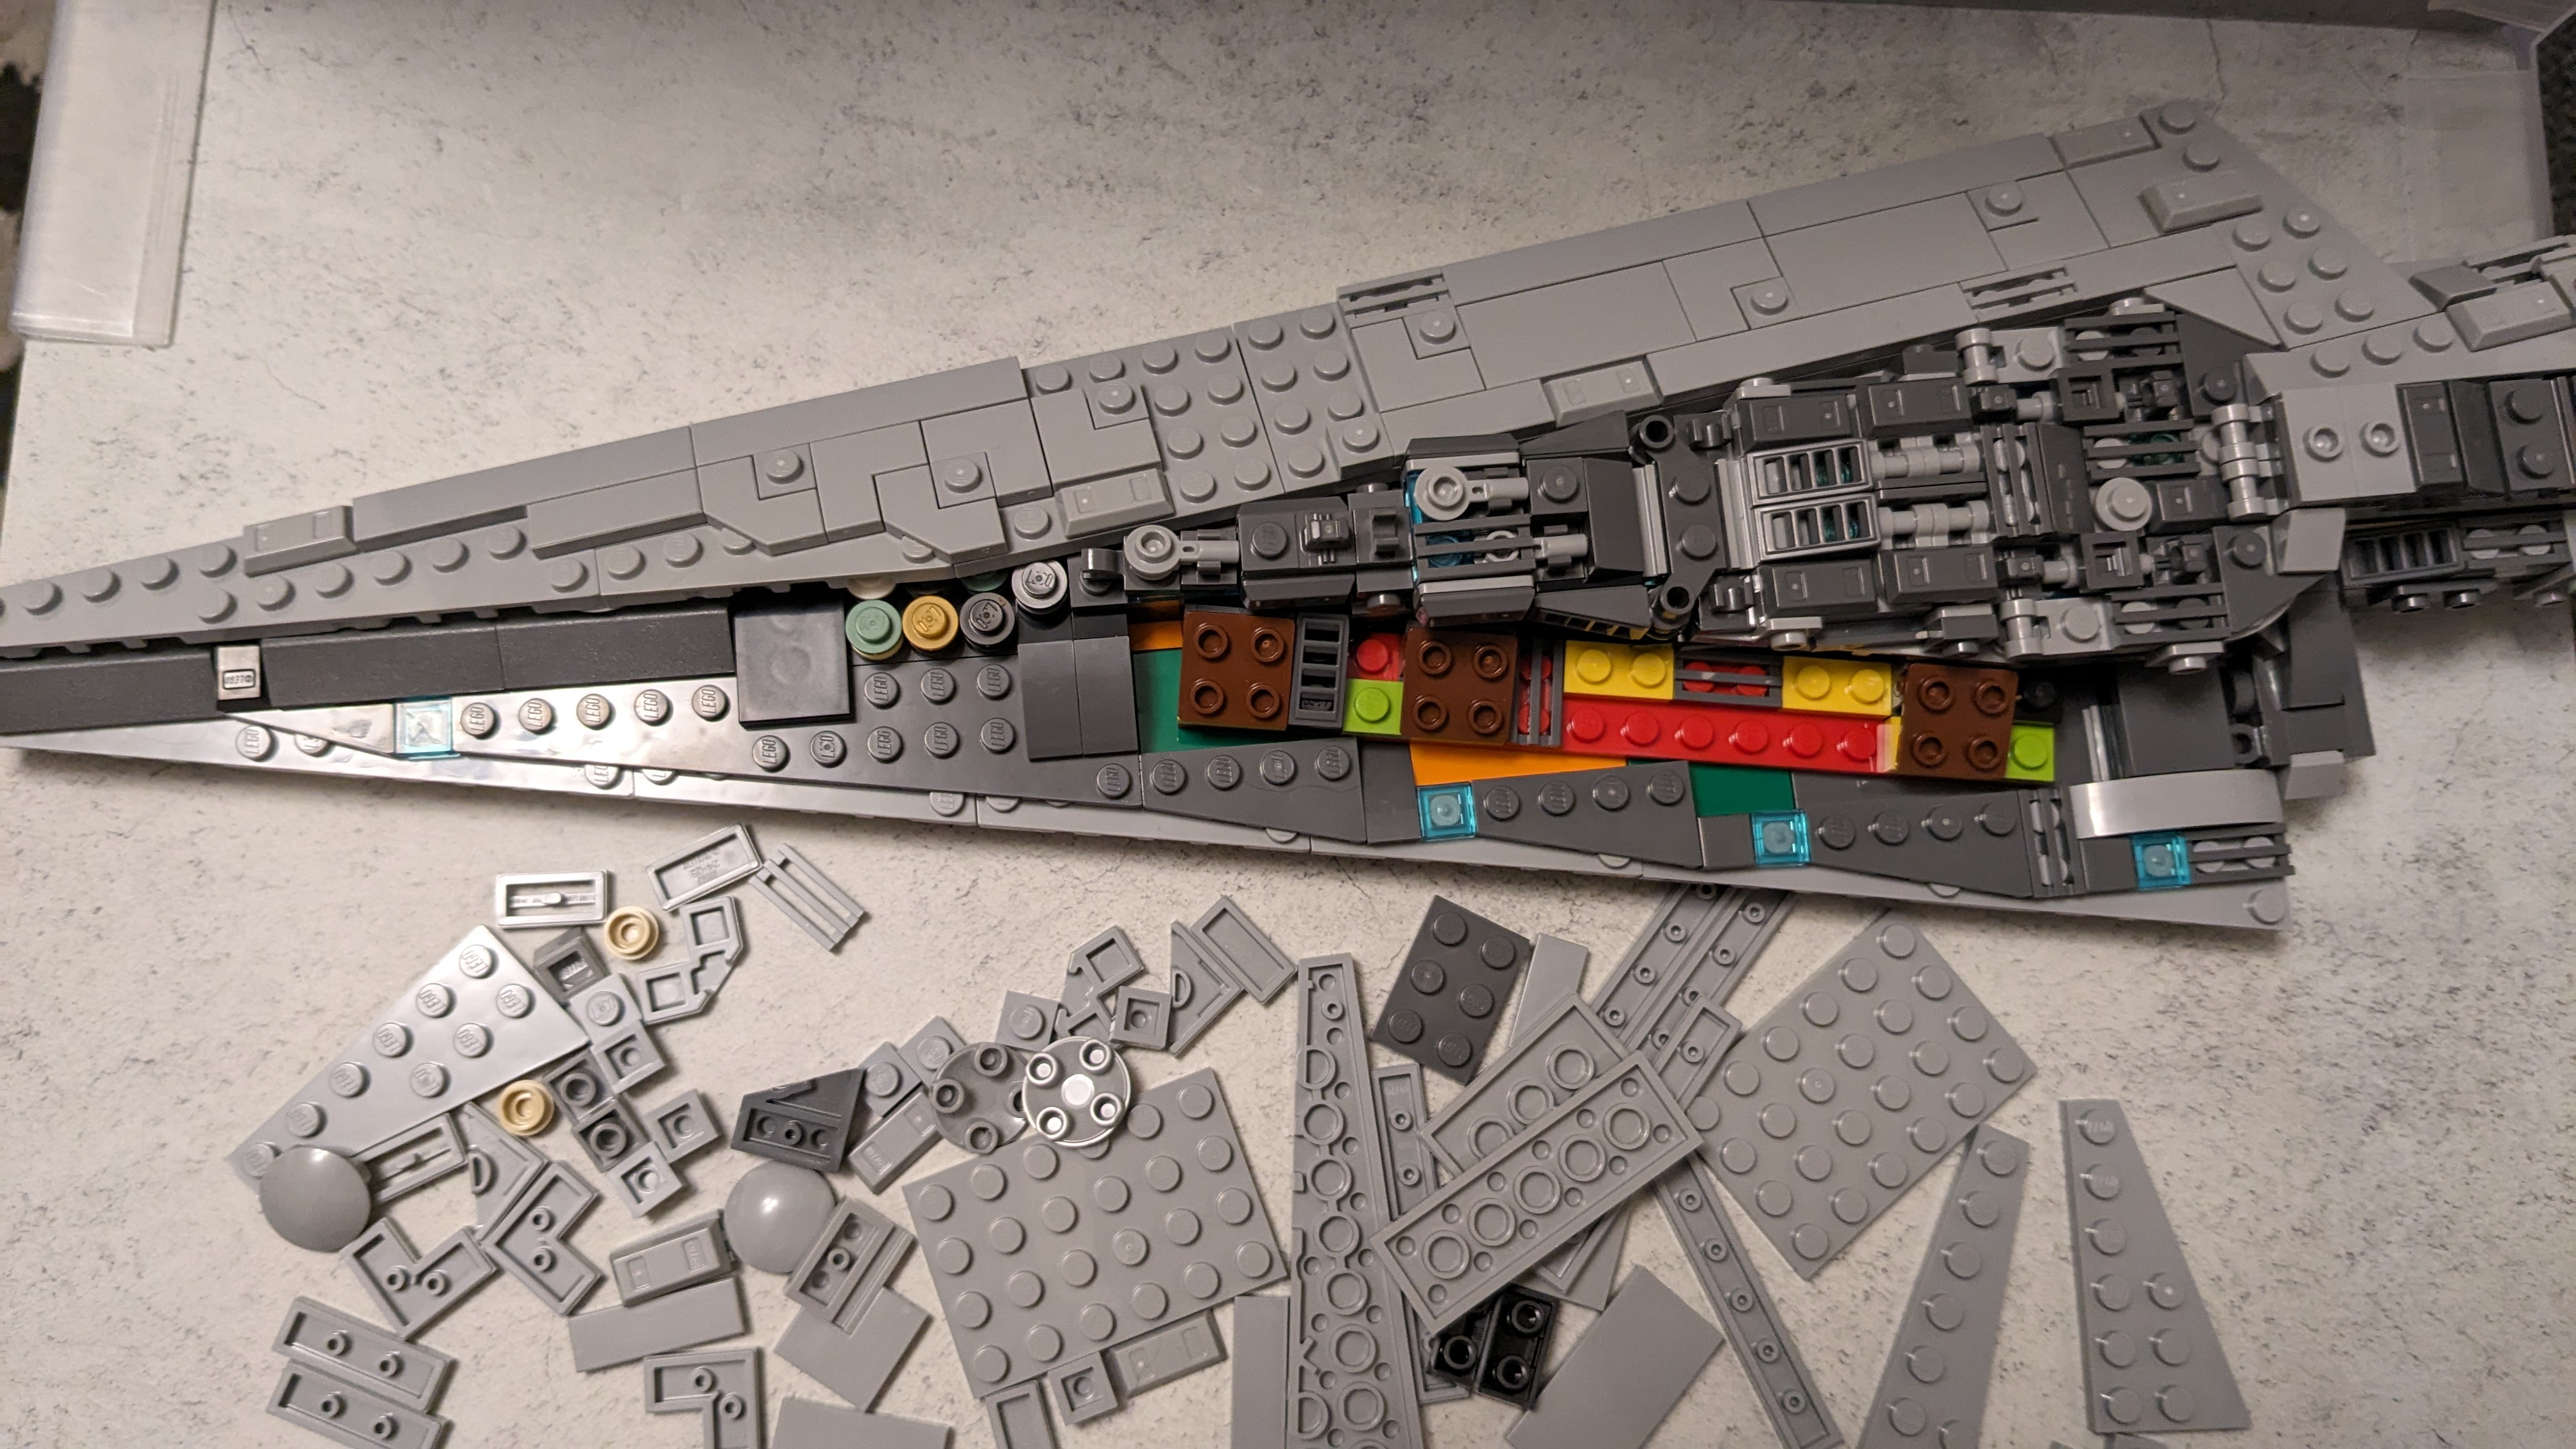 The Lego Star Wars Executor Super Star Destroyer in the process of being built.